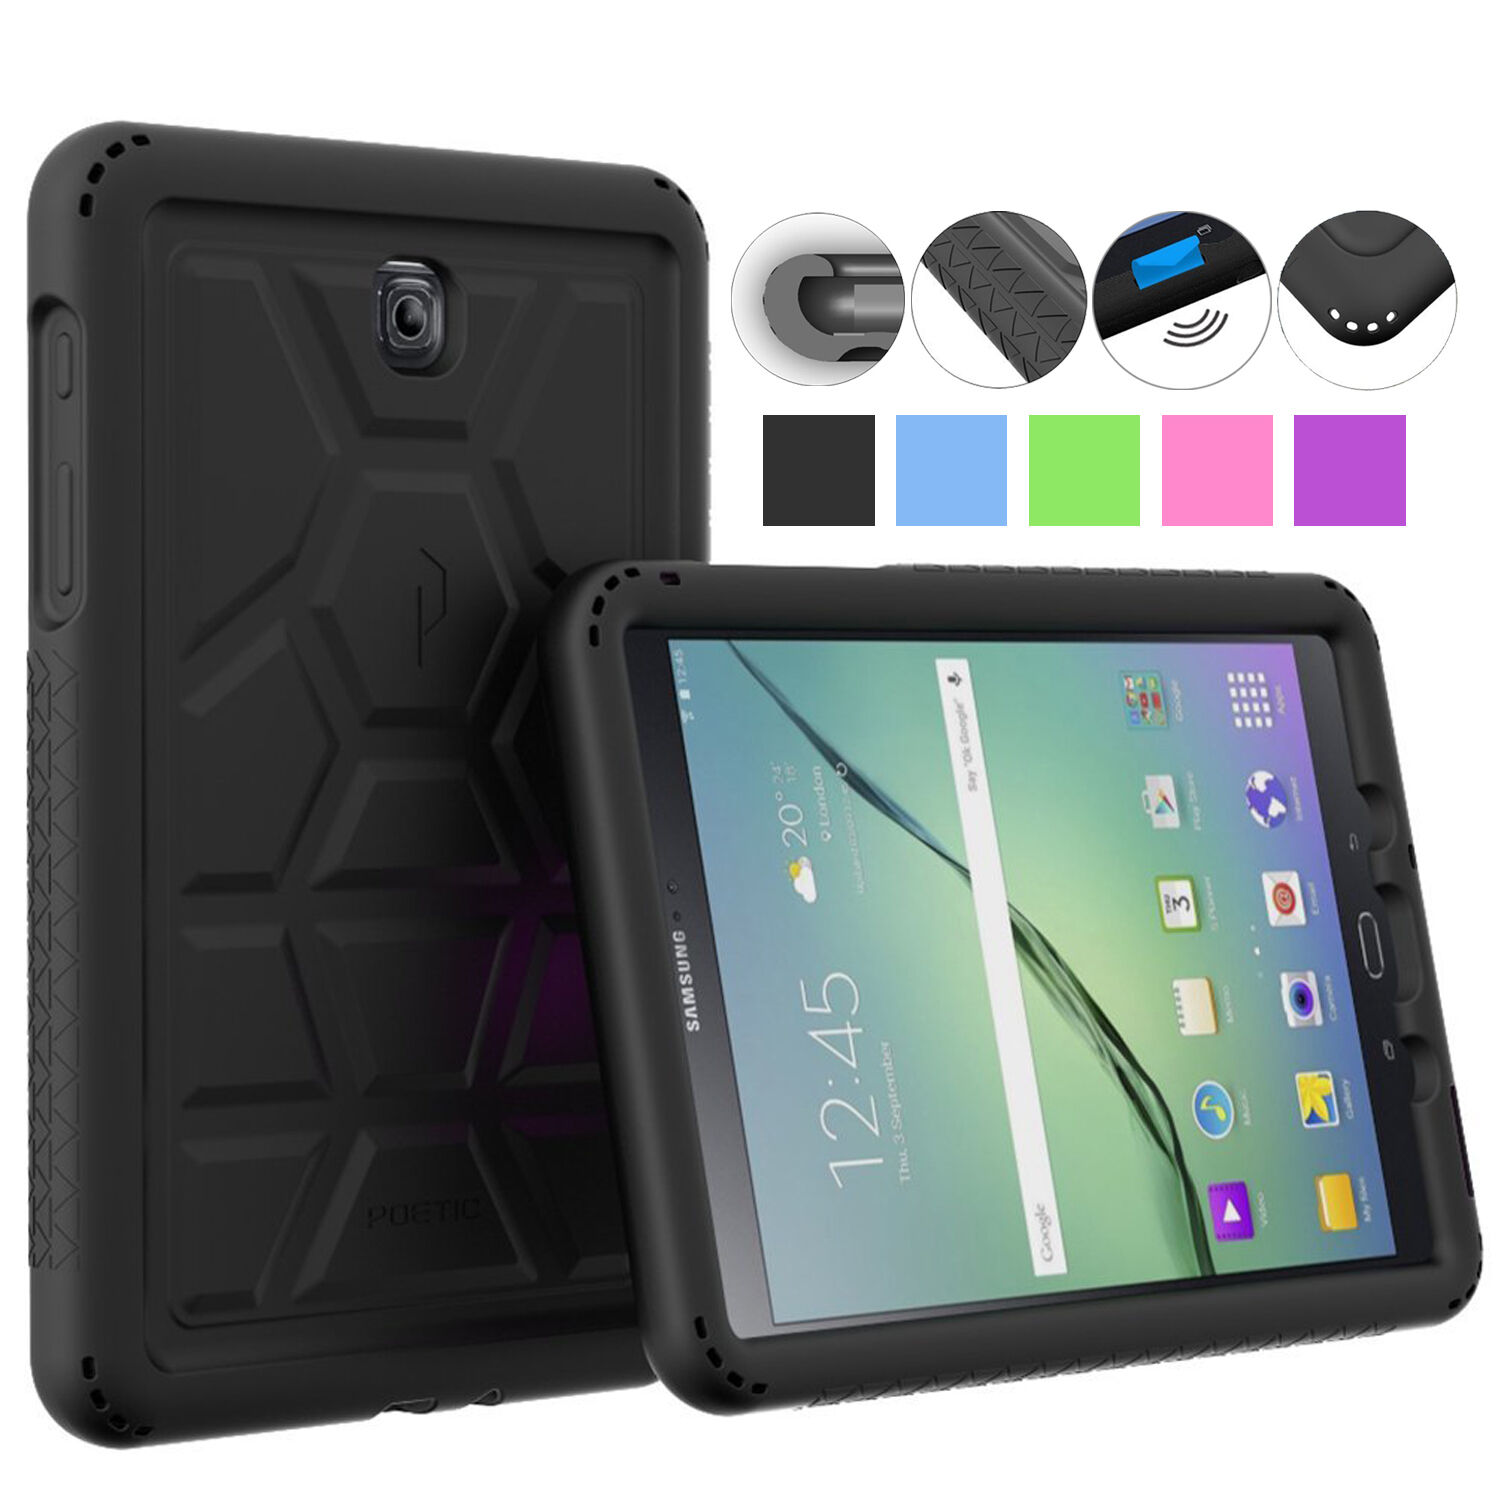 Silicone Cover Samsung Galaxy Tab E 8.0 Tab E 9.6 Tab A 9.7 Tablet Case Poetic Does Not Apply